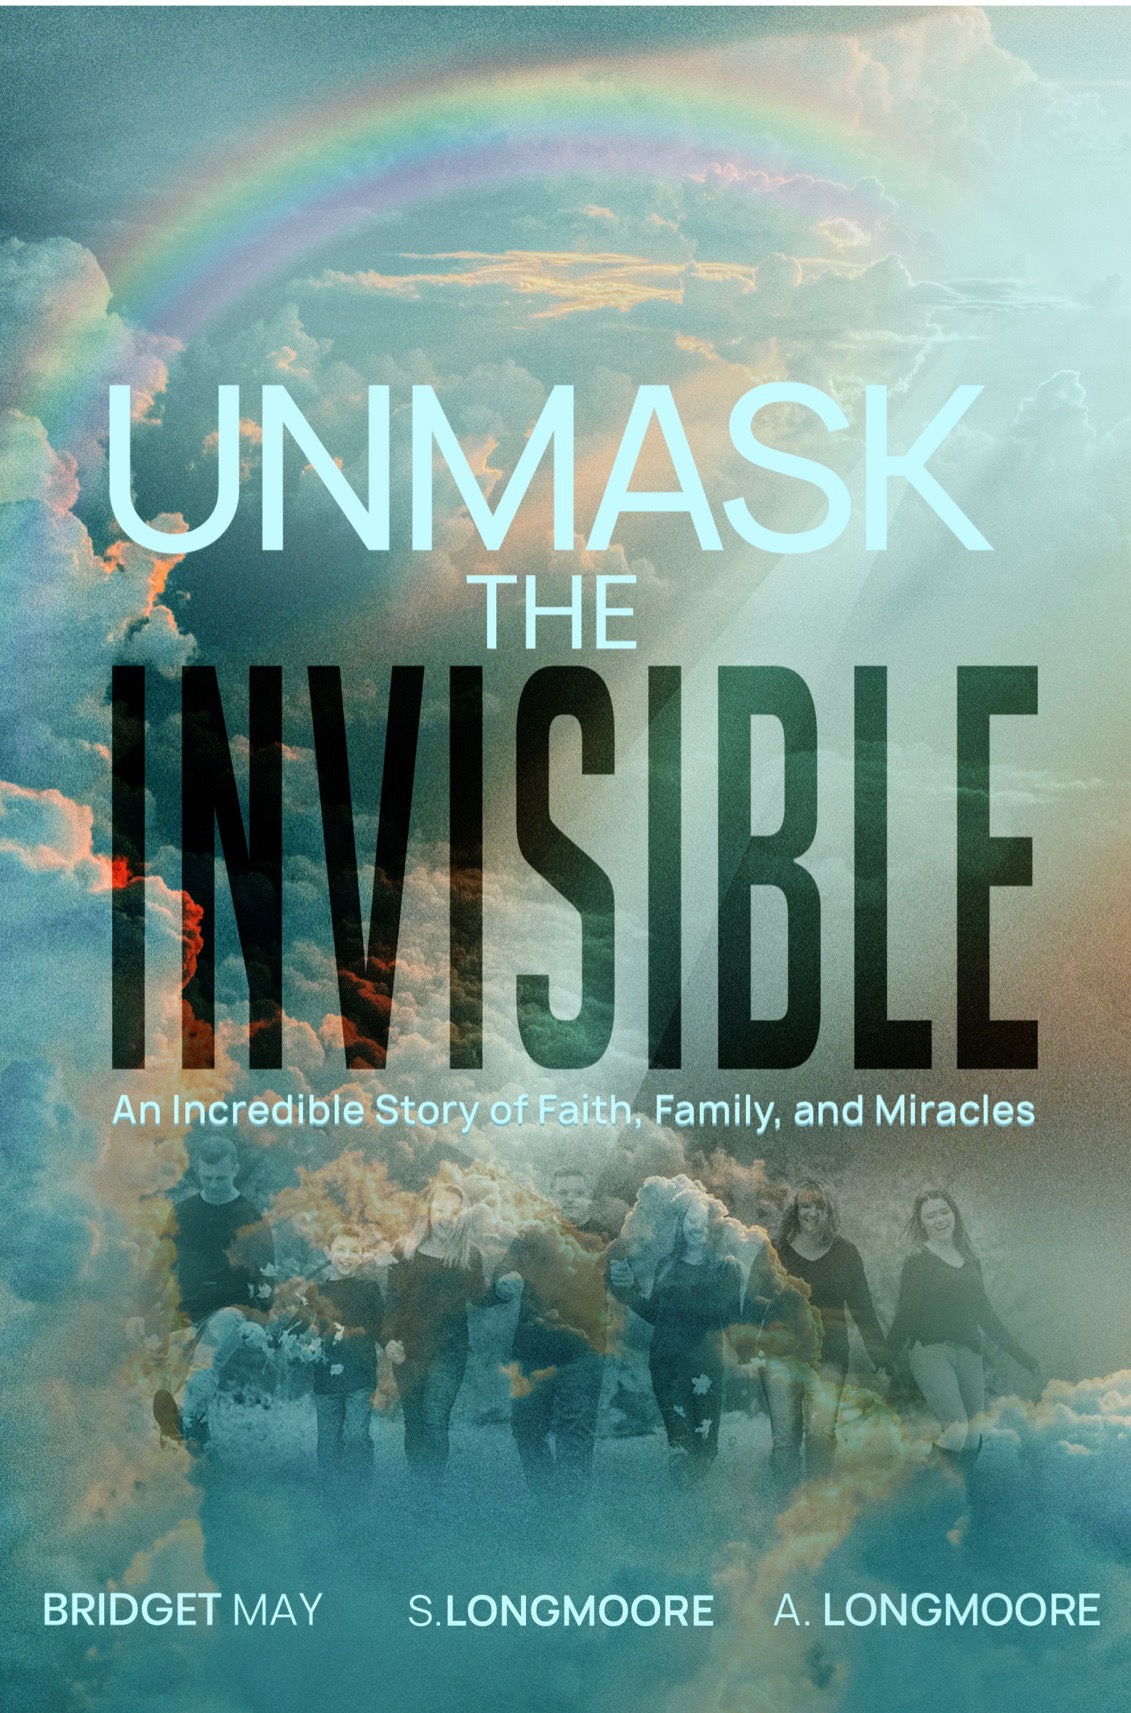 Unmask the Invisible Book Cover - Creative photo blend of clouds with rainbow and Longmoore Family